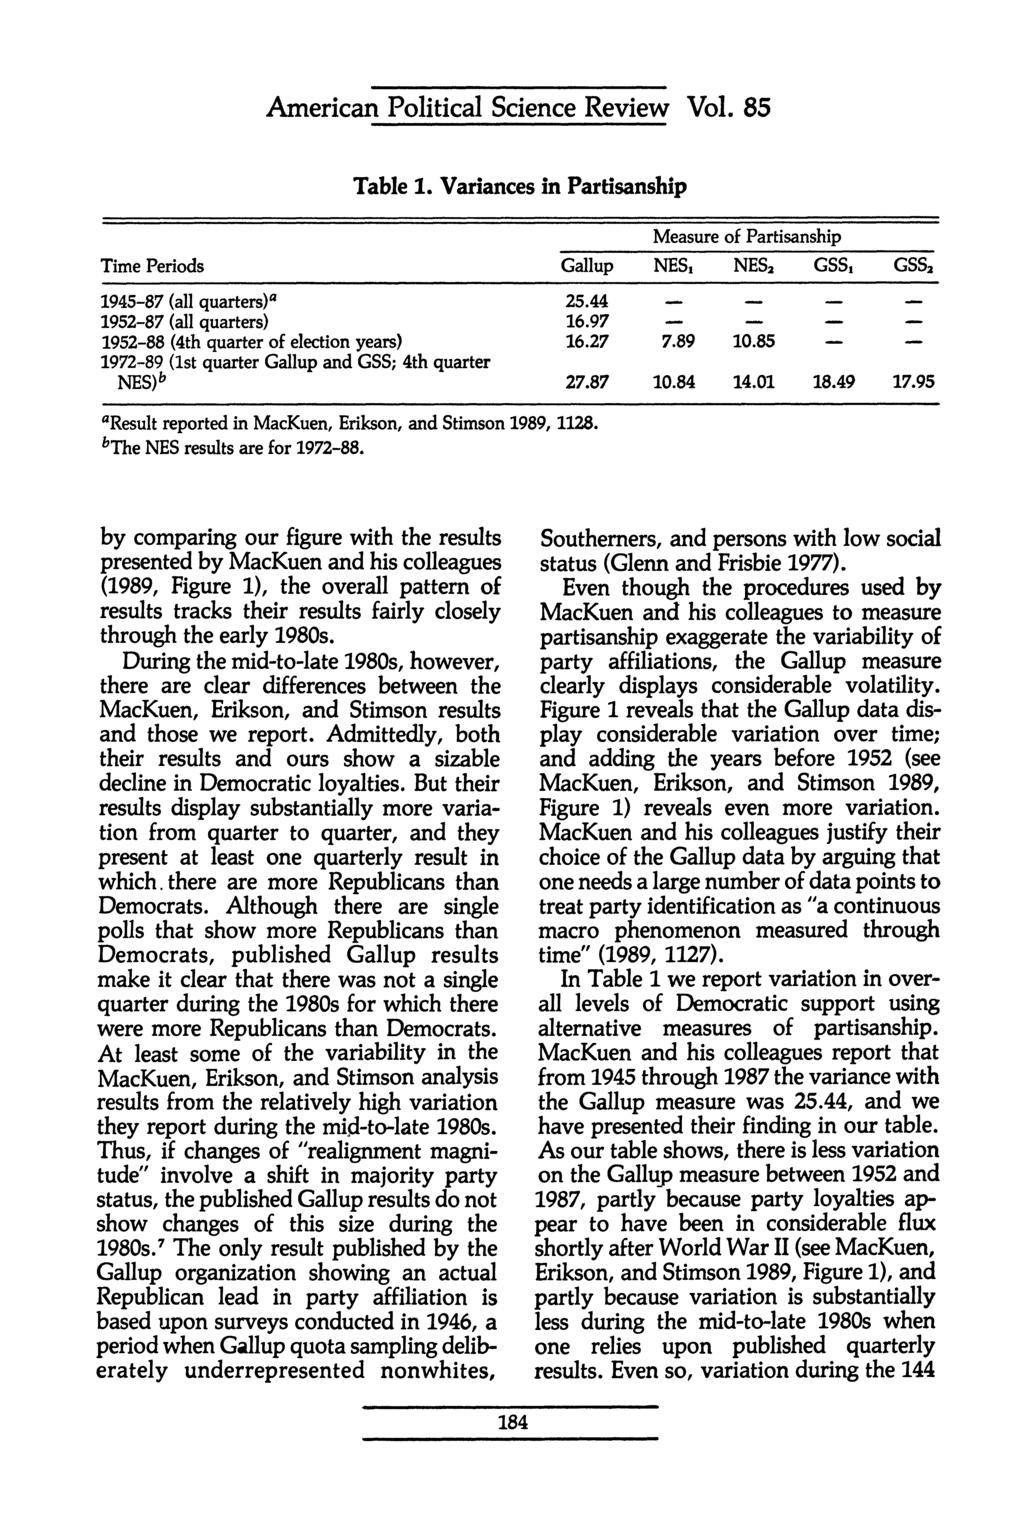 American Political Science Review Vol. 85 Table 1. Variances in Partisanship Measure of Partisanship Time Periods Gallup NES, NES2 GSS, GSS2 1945-87 (all quarters)a 25.